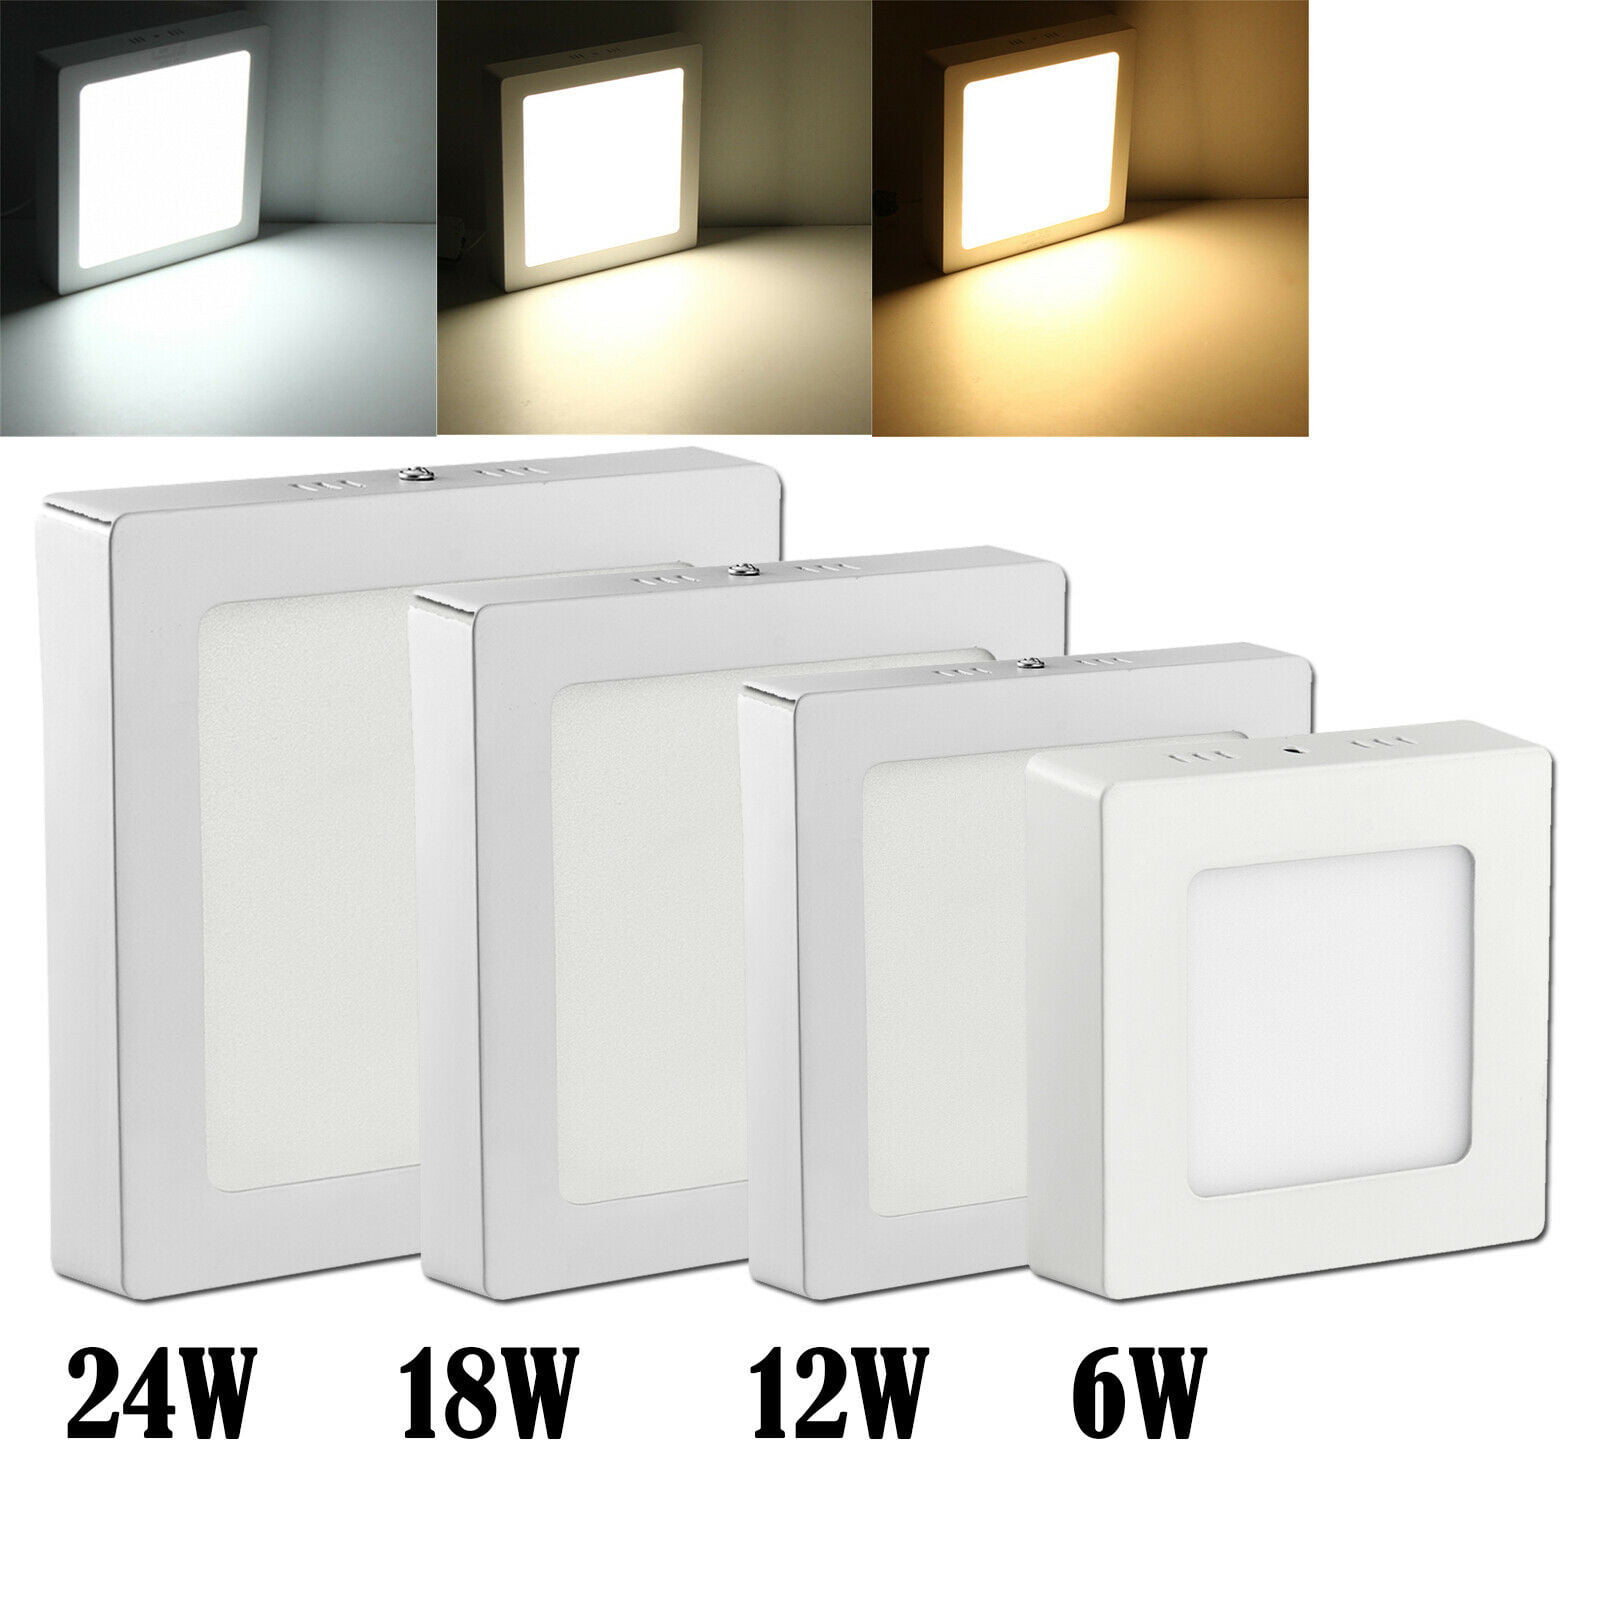 6W 12W 18W 24W Surface Mounted LED Ceiling Panel Light Wall Down Lamp Fixtures